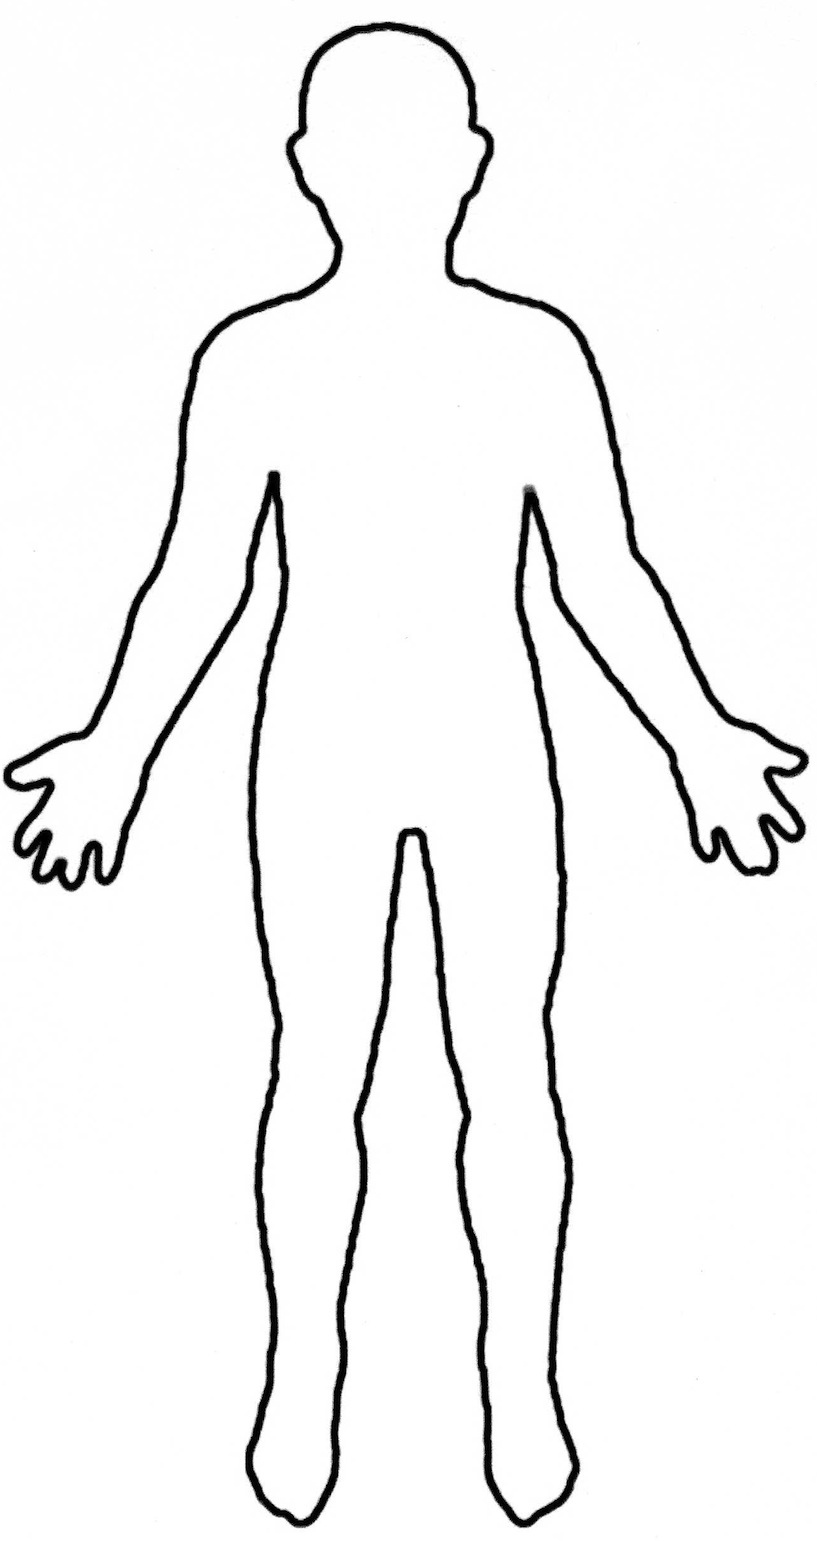 Human Body Outline Printable | Free download on ClipArtMag